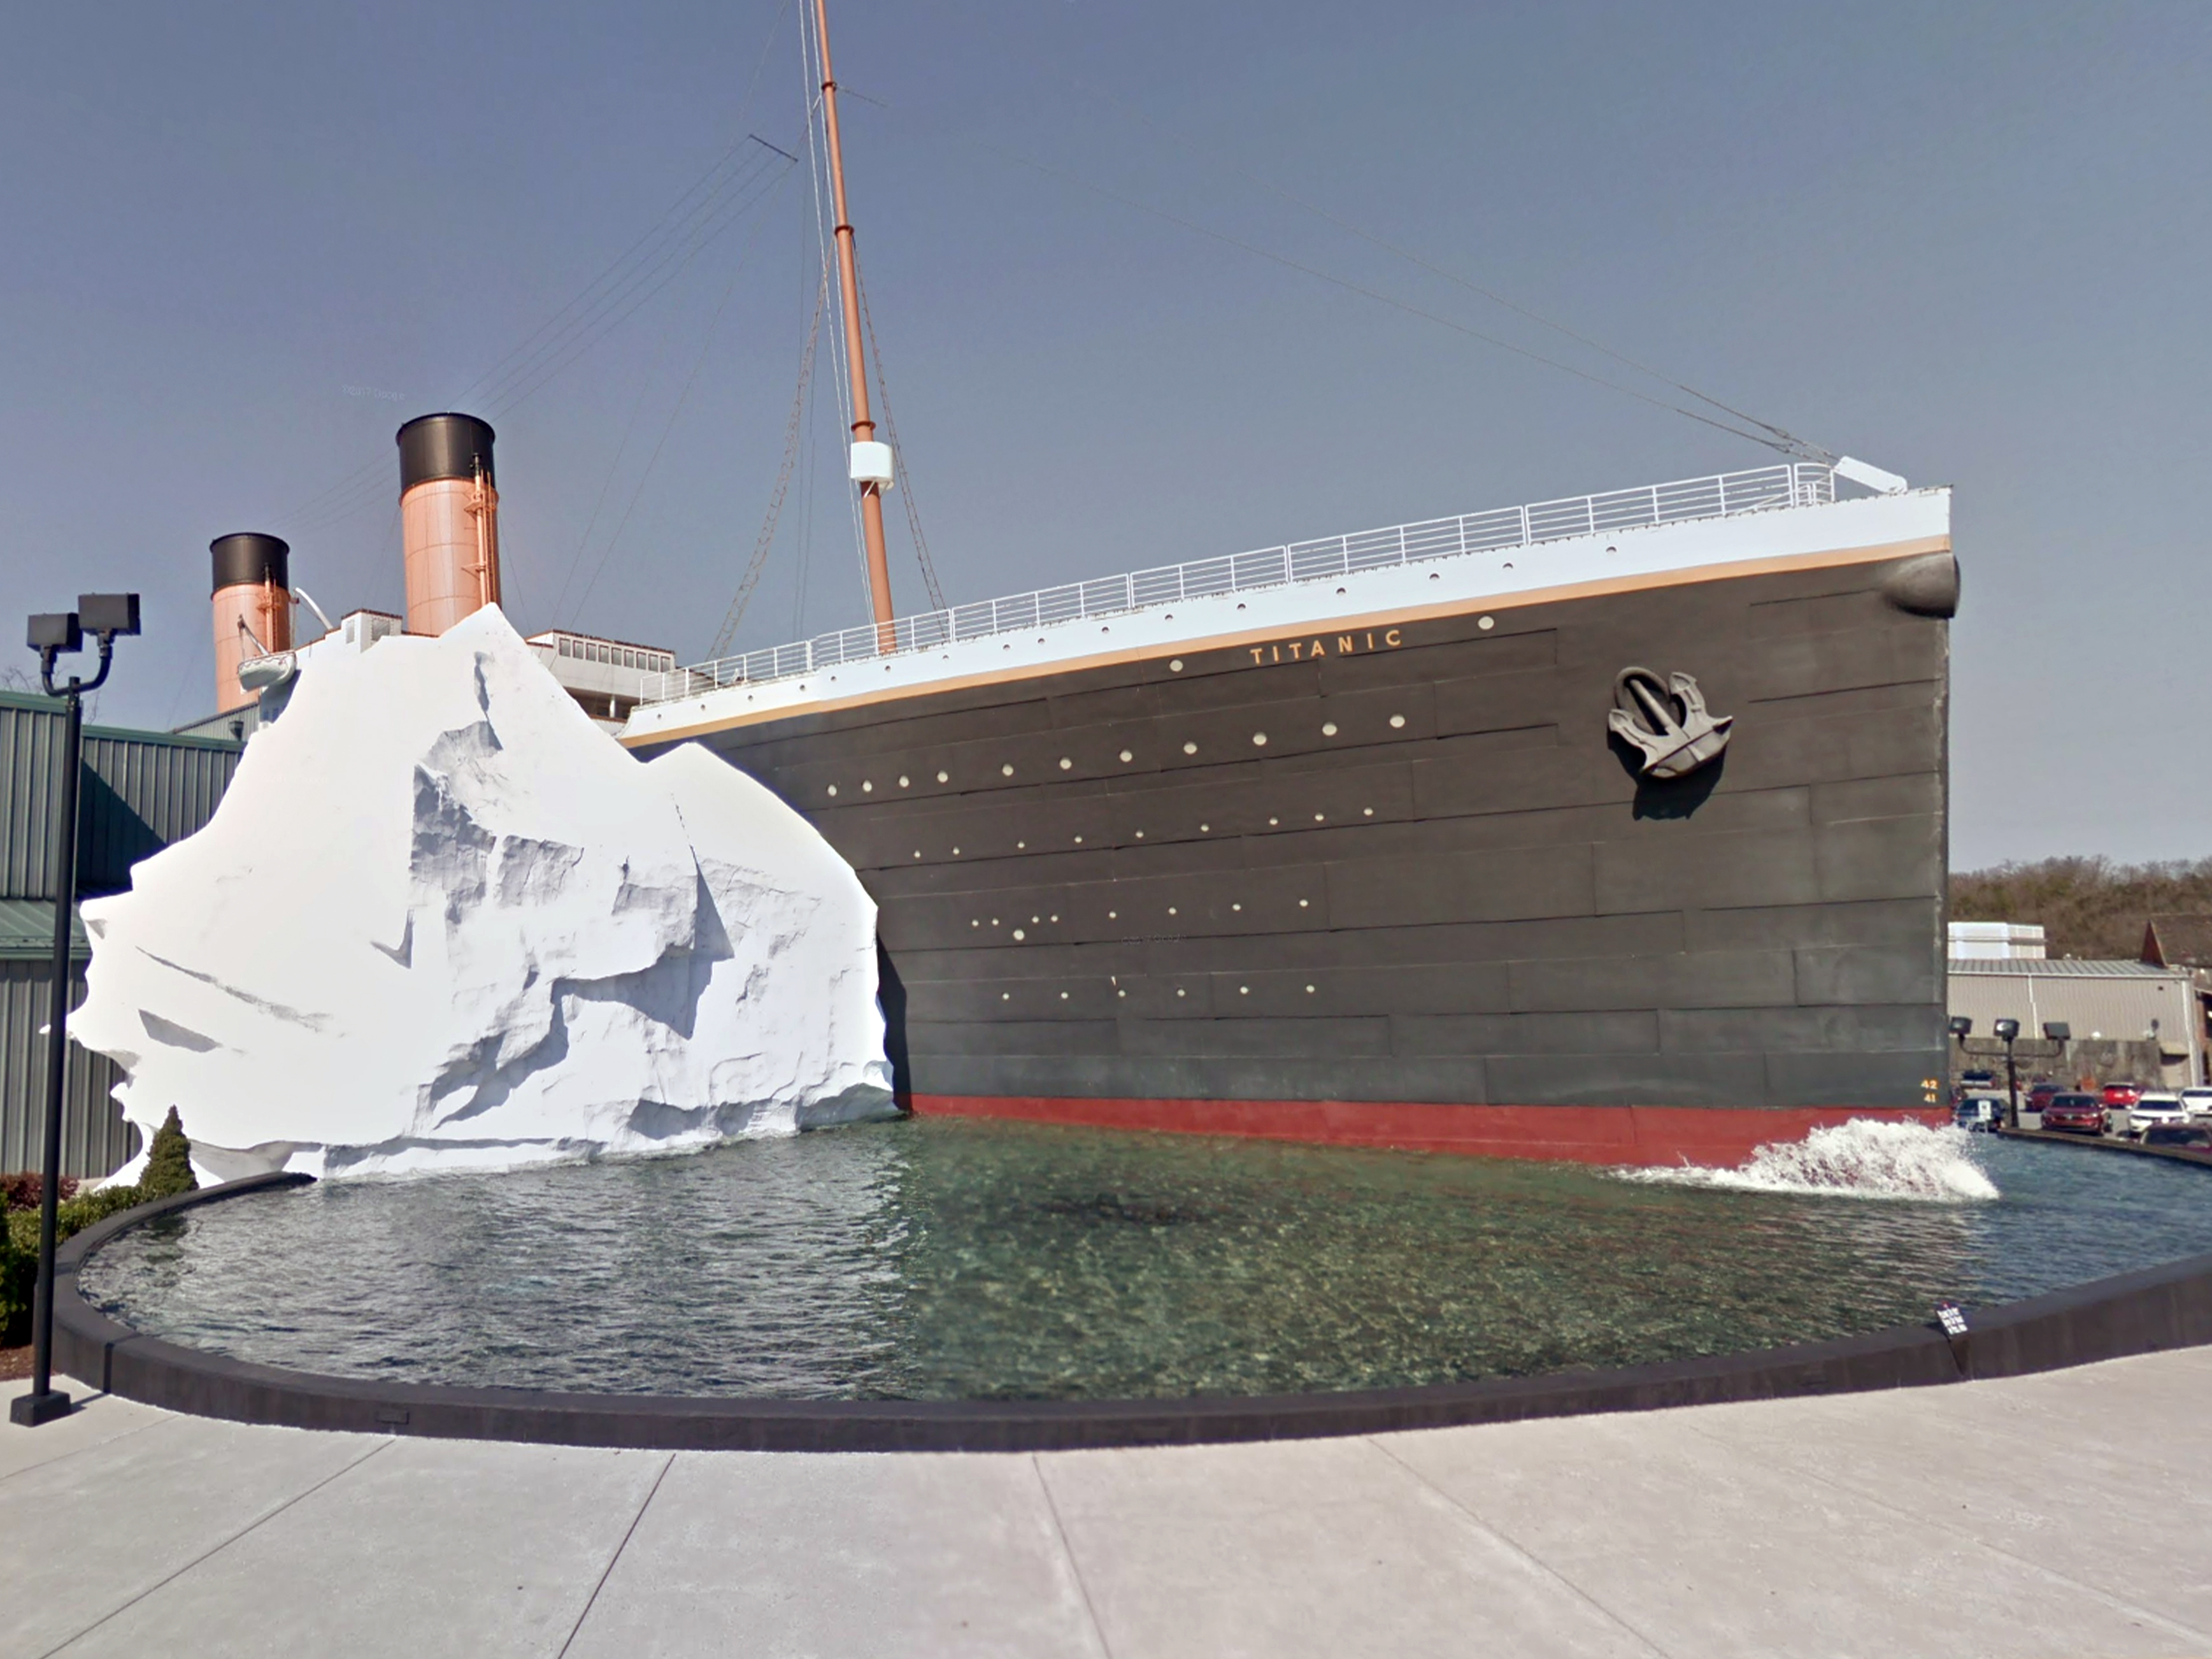 Three hospitalized after iceberg incident at Tennessee Titanic museum